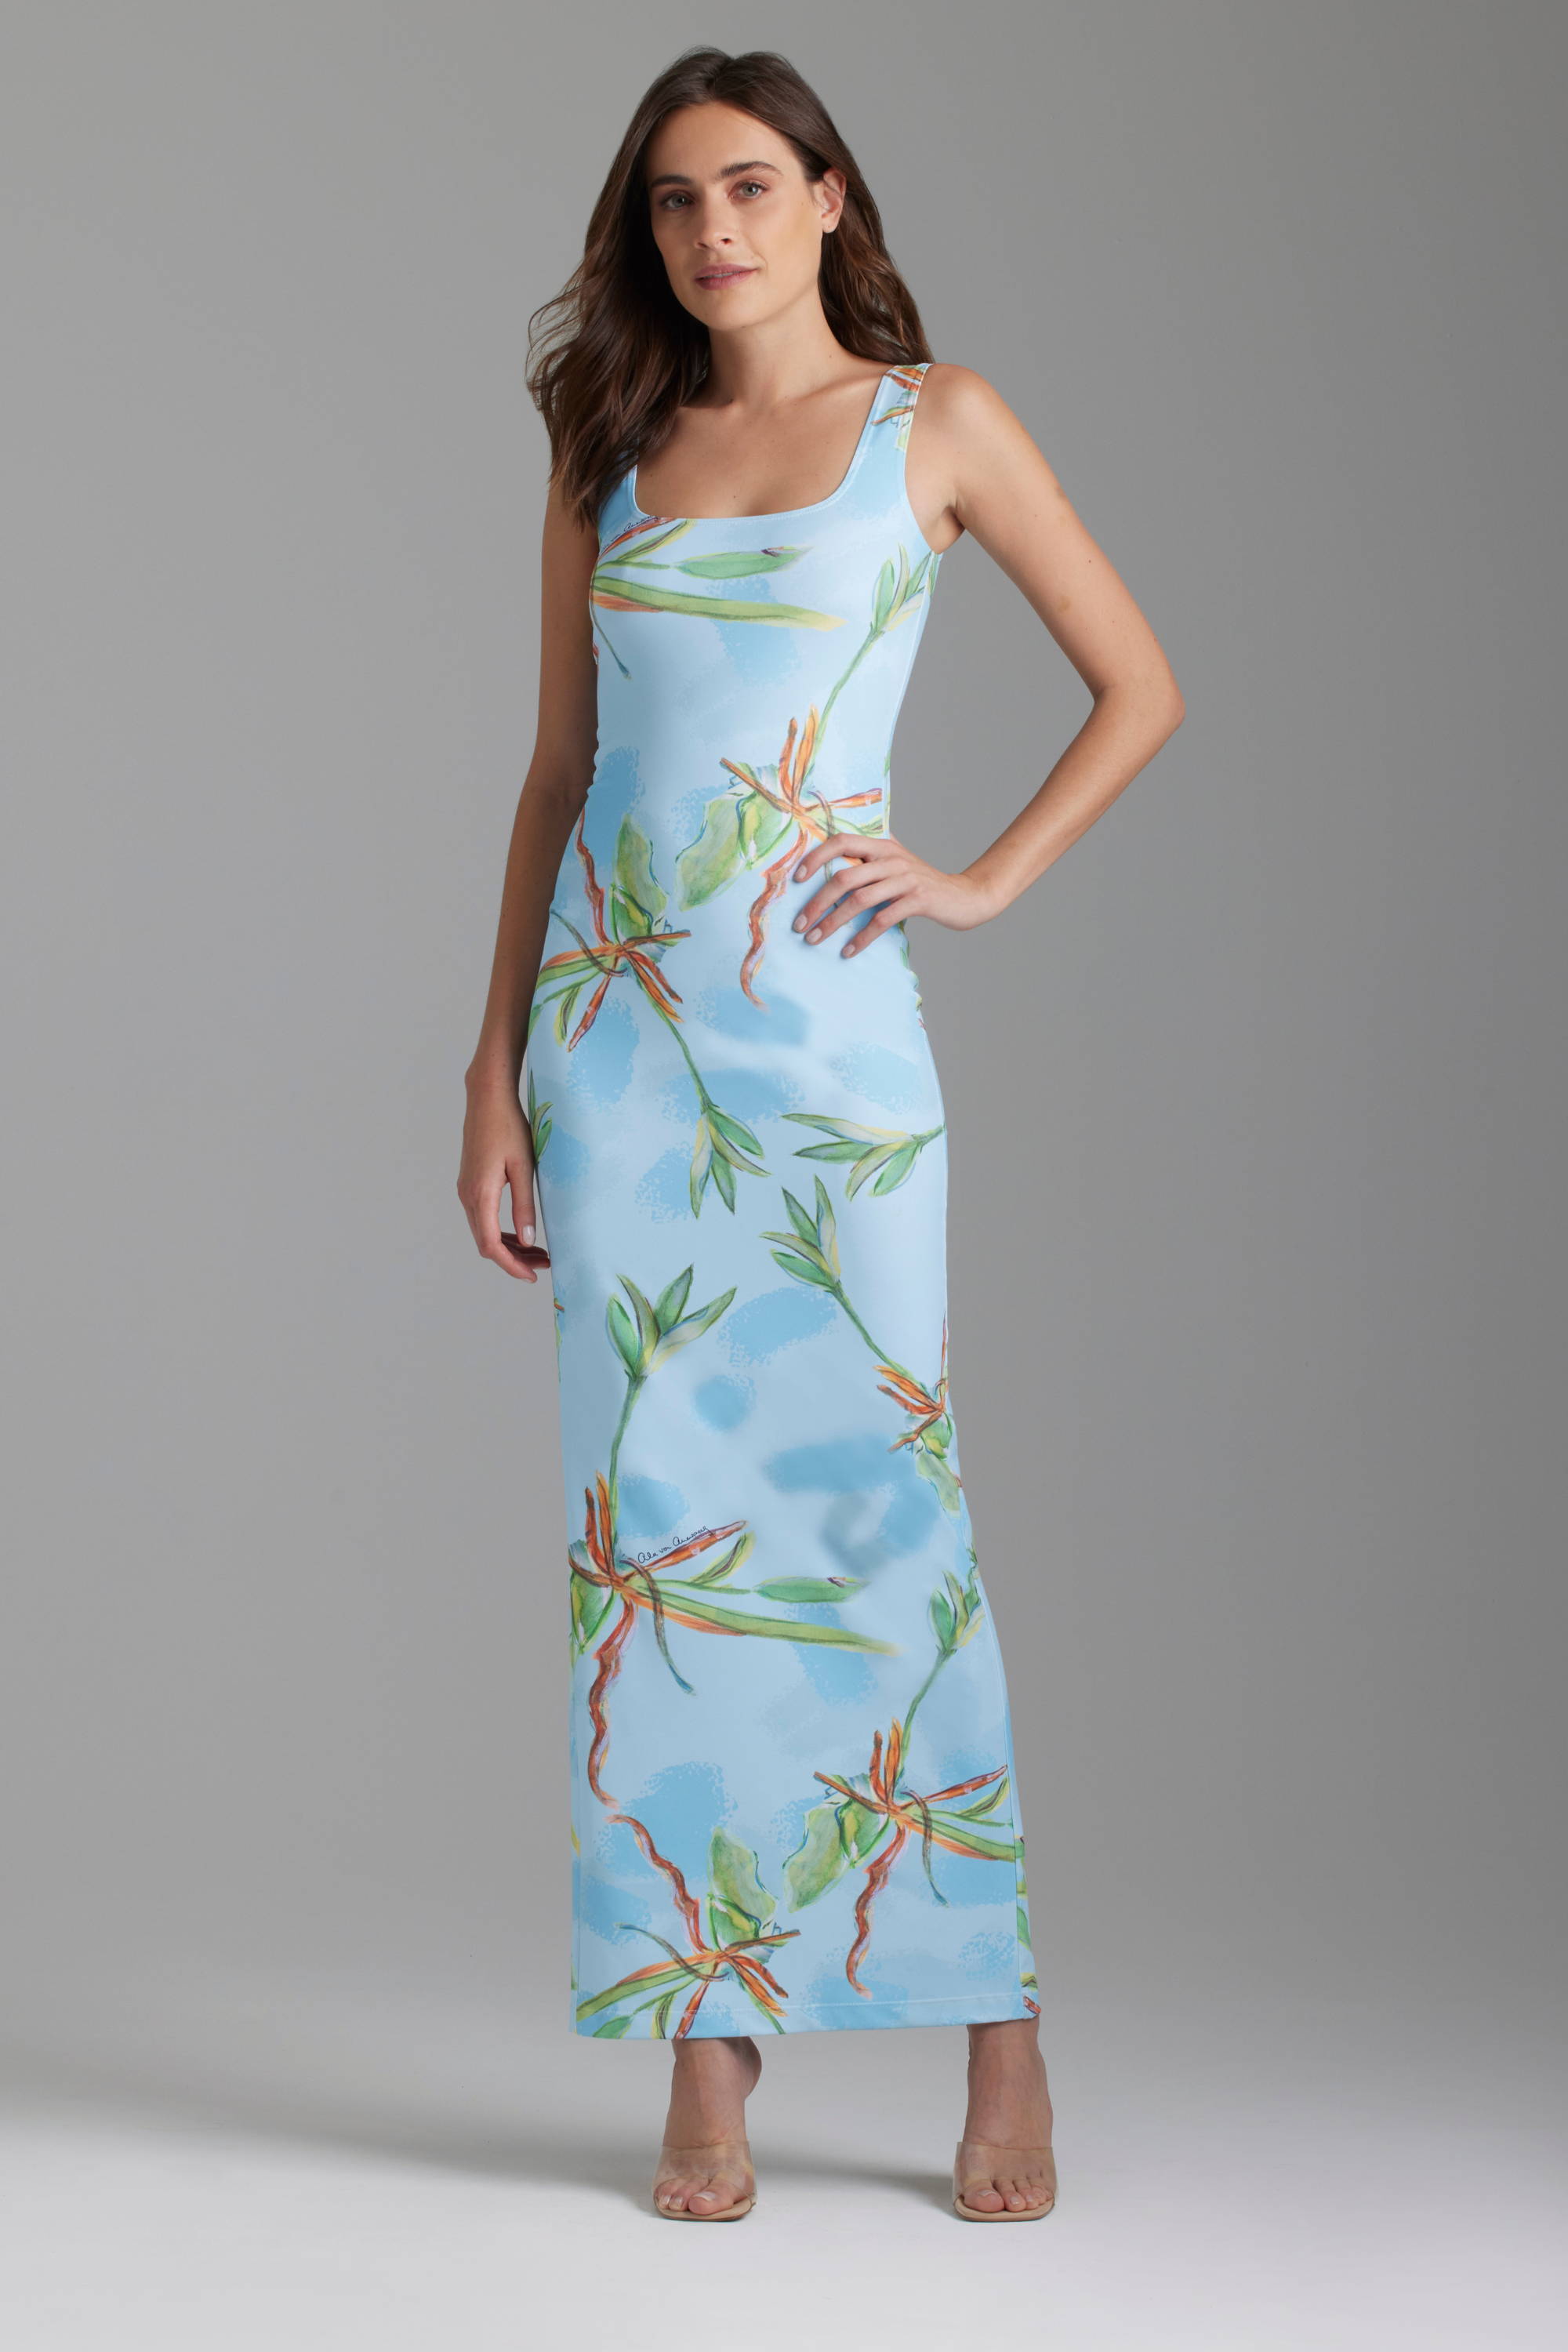 Woman wearing bamboo printed blue long stretch knit dress by Ala von Auersperg